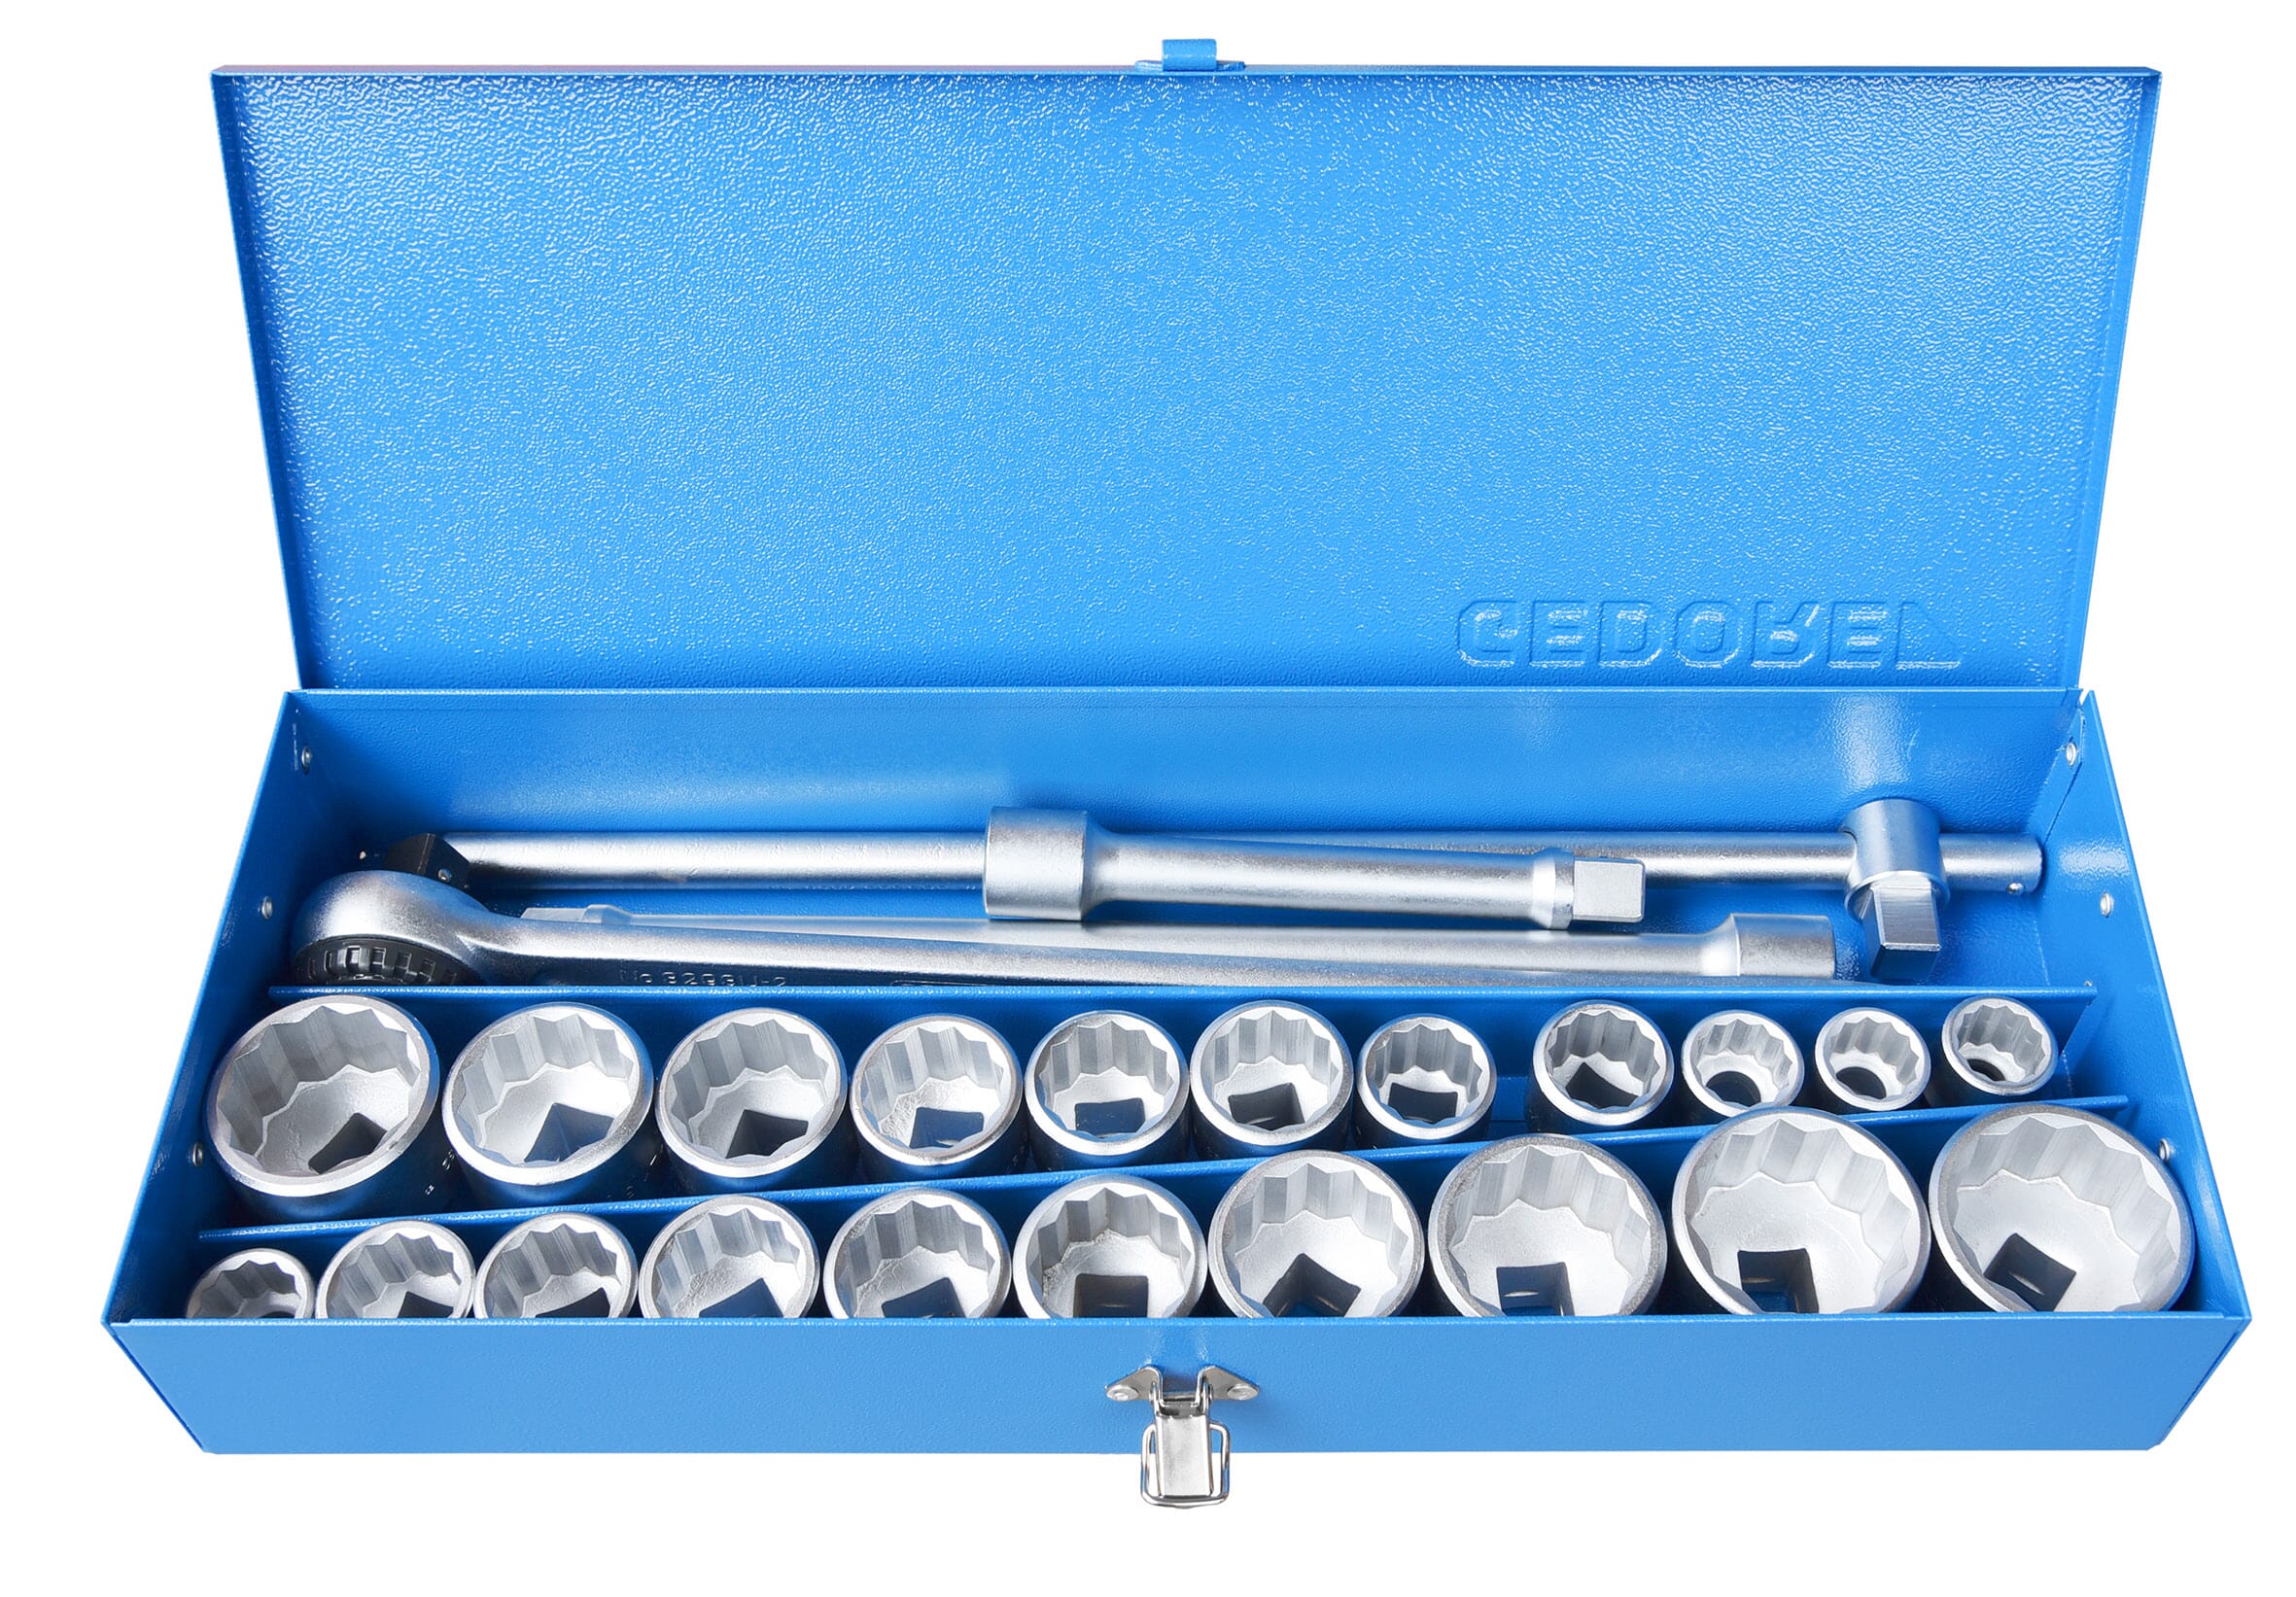 Gedore 3/4"Dr X 25Pc Combination Metric/Imperial Socket Set